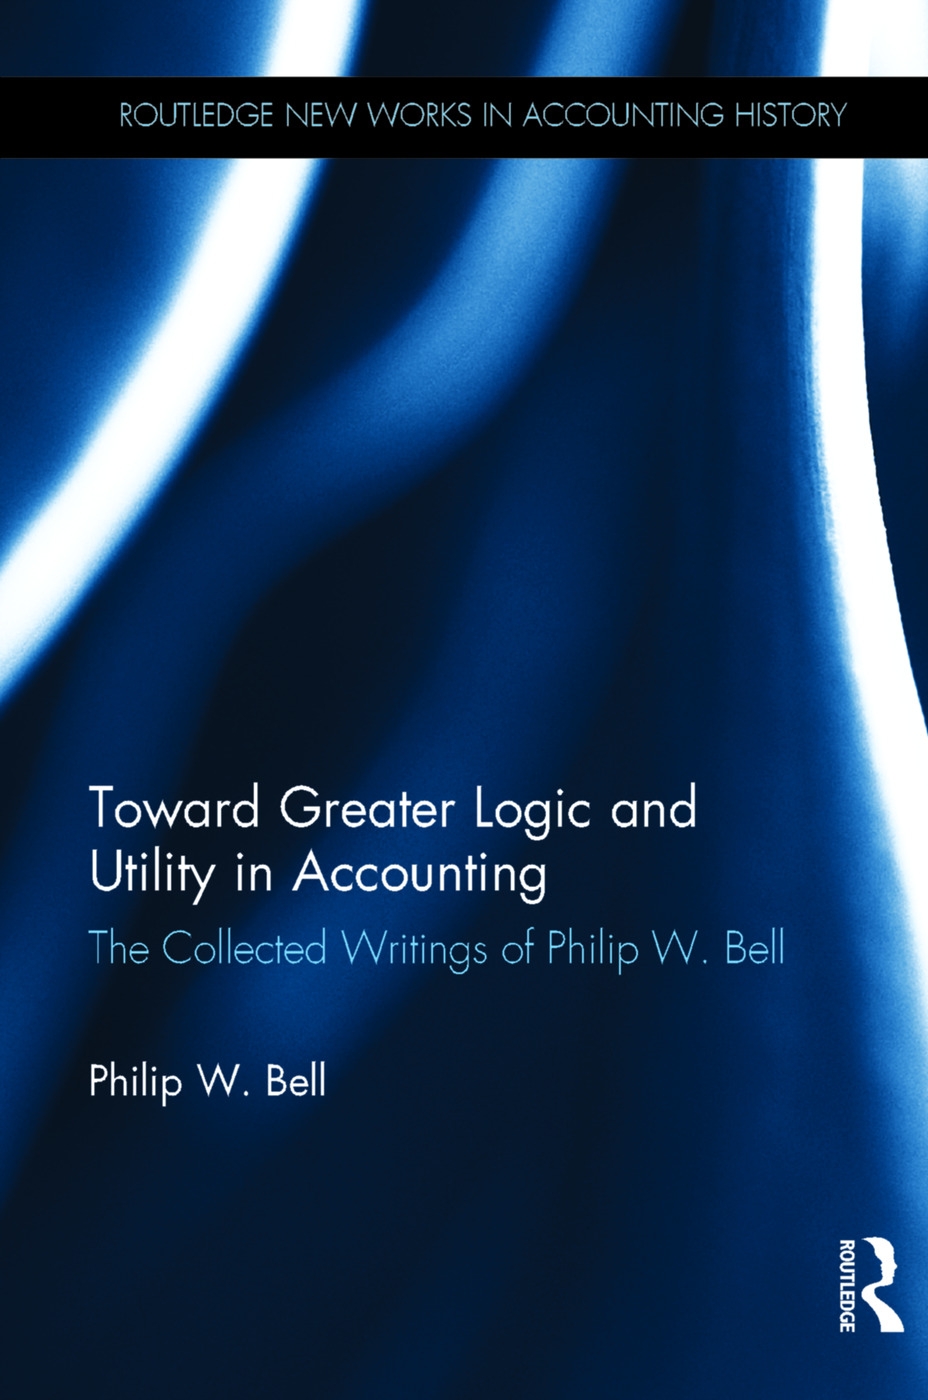 Toward Greater Logic and Utility in Accounting: The Collected Writings of Philip W. Bell